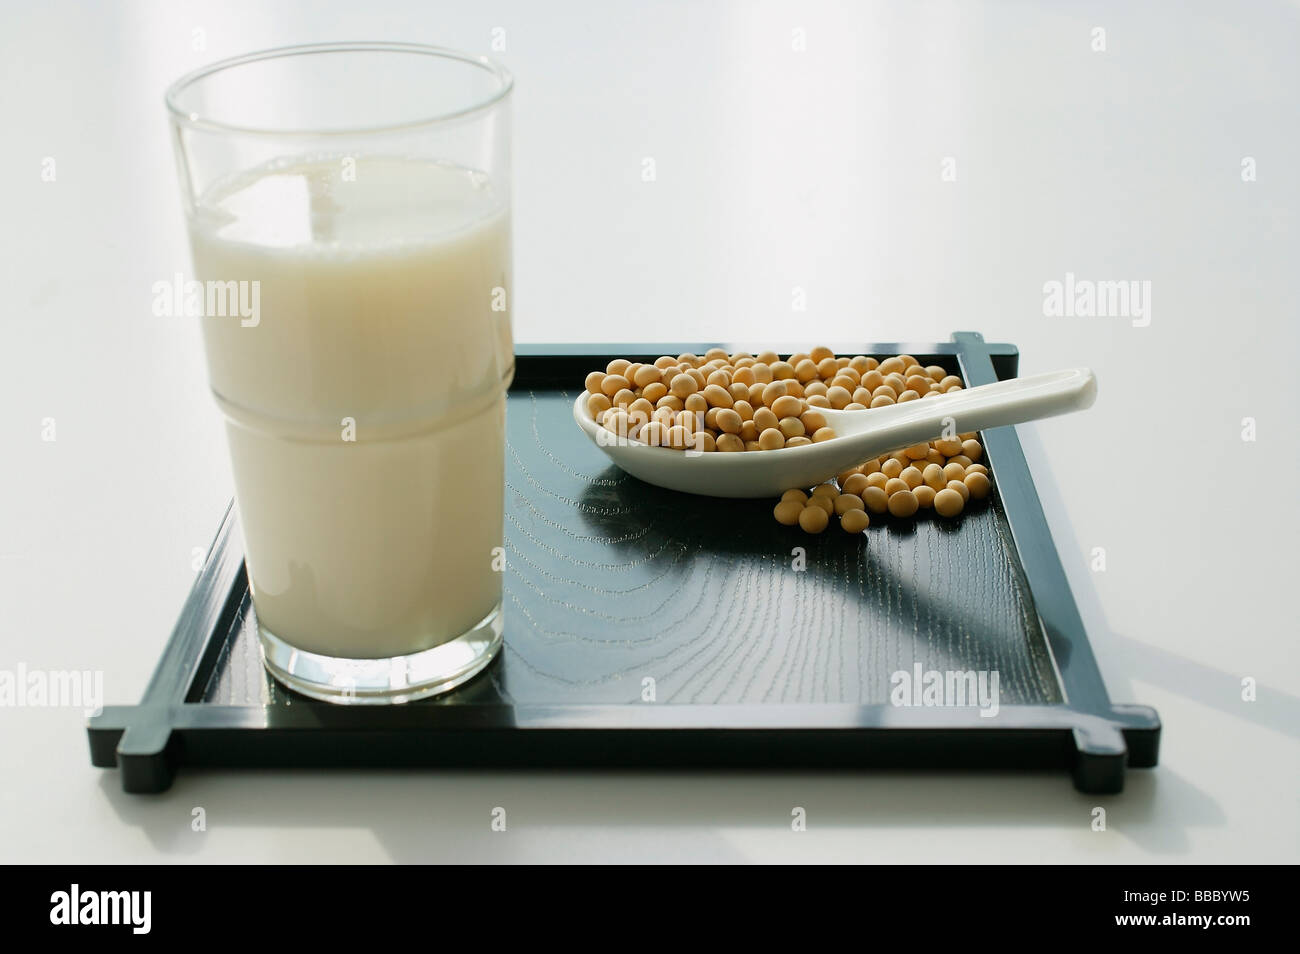 Still life of soya bean drink and soya beans Stock Photo